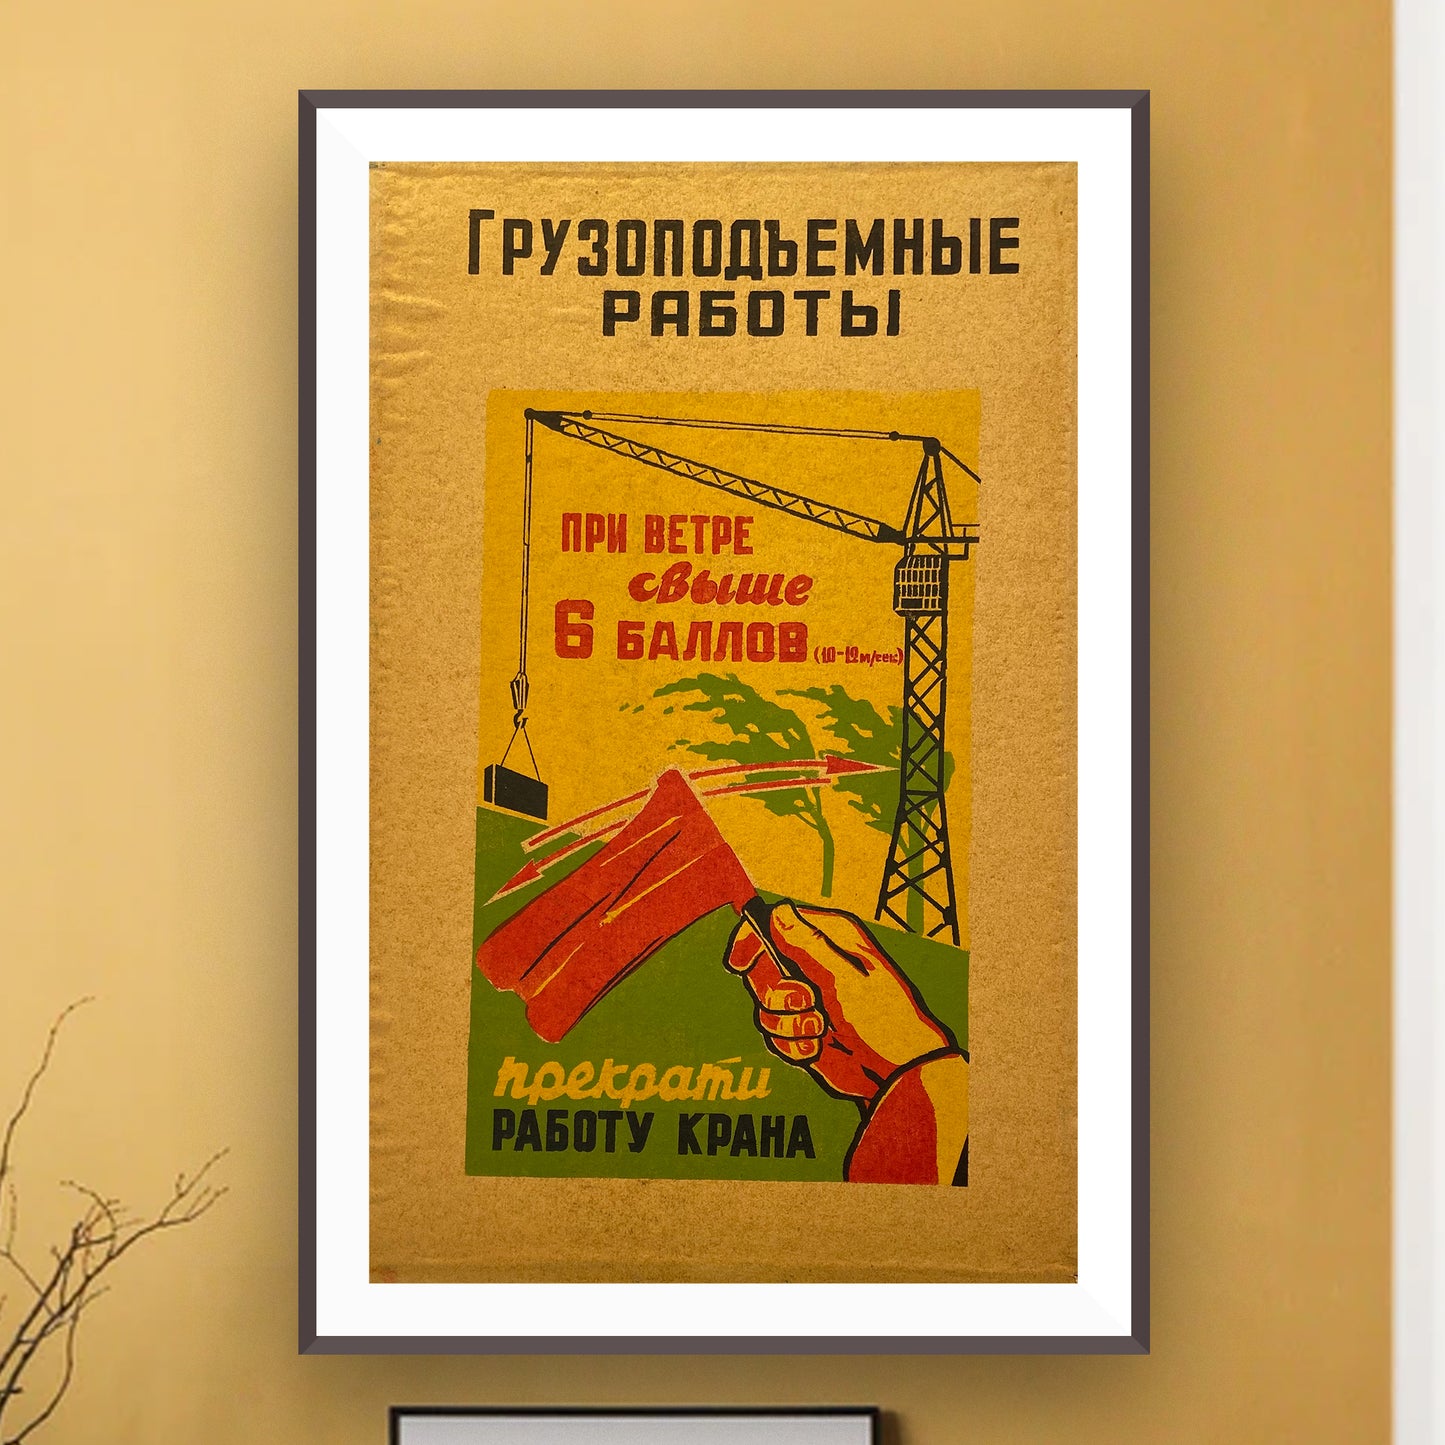 Poster, "Lifting works. Stop work when the wind is higher than 6 points", Worker safety VEF Riga, Latvian SSR, 1960s